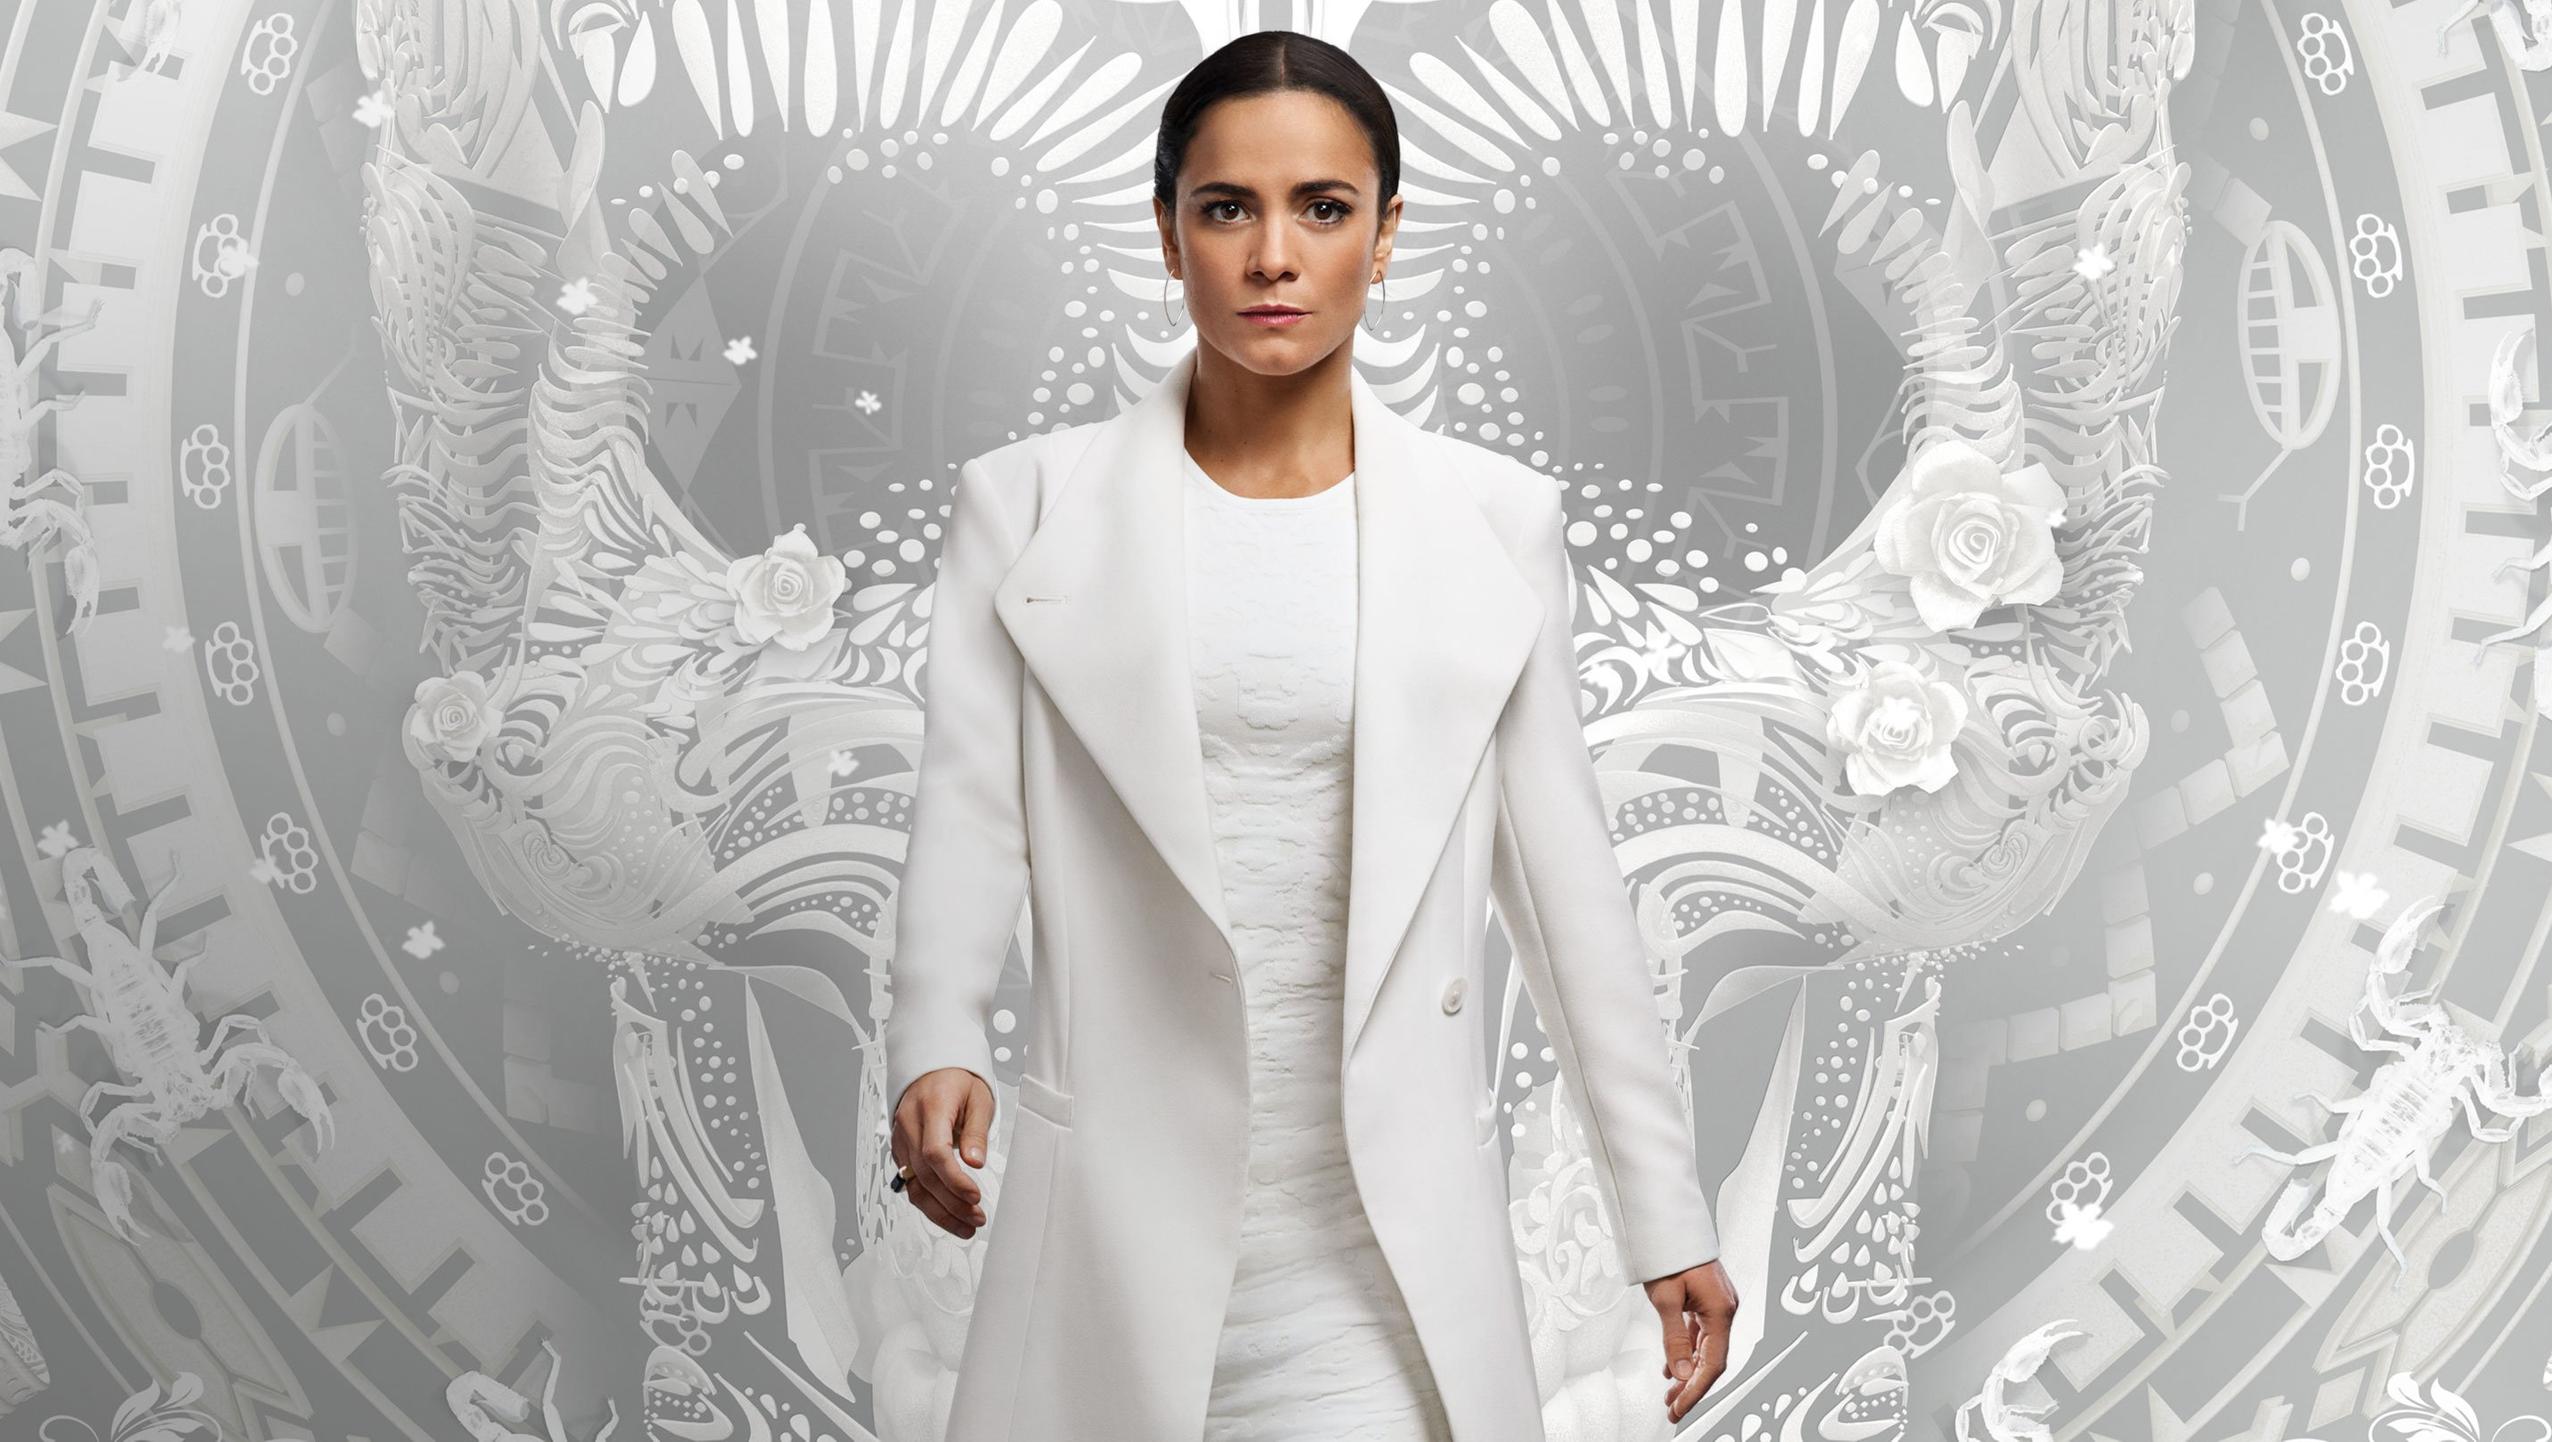 Alice Braga Hd Queen Of The South Wallpapers